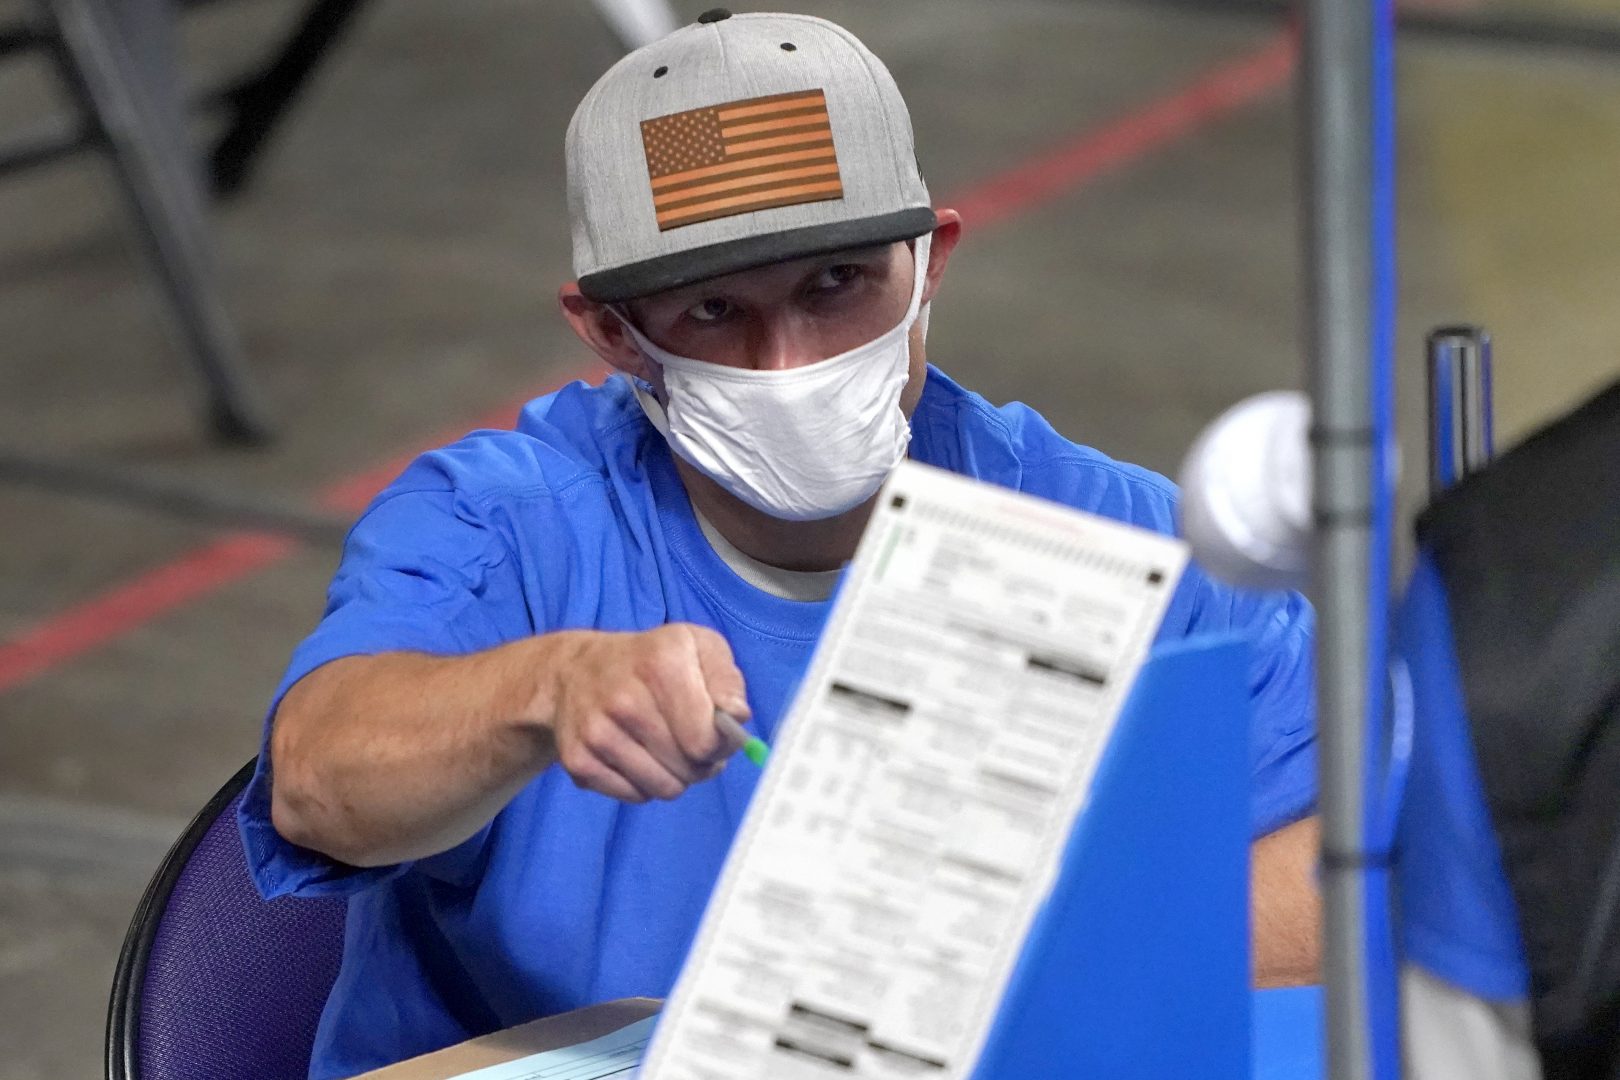 Maricopa County ballots cast in the 2020 general election are examined and recounted by contractors working for Florida-based company, Cyber Ninjas, Thursday, May 6, 2021 at Veterans Memorial Coliseum in Phoenix. The audit, ordered by the Arizona Senate, has the U.S. Department of Justice saying it is concerned about ballot security and potential voter intimidation arising from the unprecedented private recount of the 2020 presidential election results. 